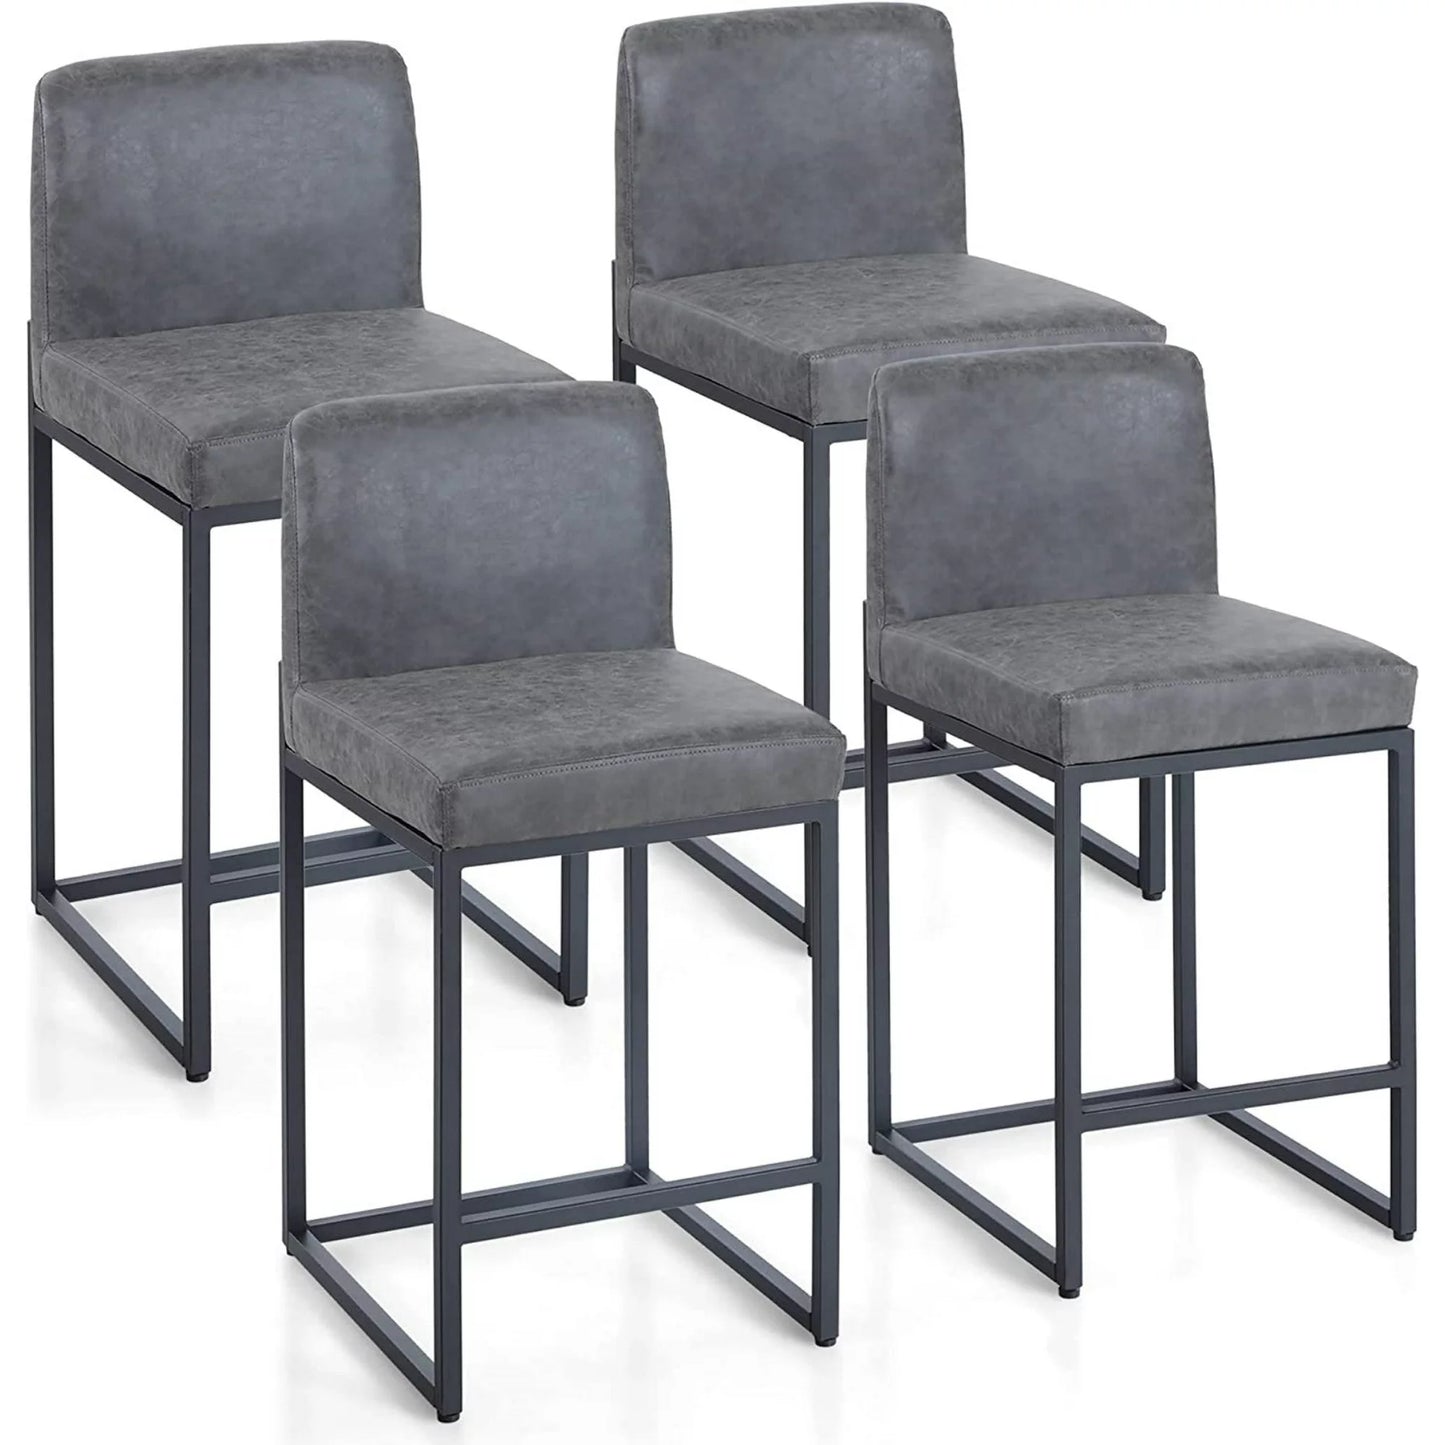 Sophia & William 24" PU Leather Counter Height Bar Stool with Backrest-Set of 4-Gray